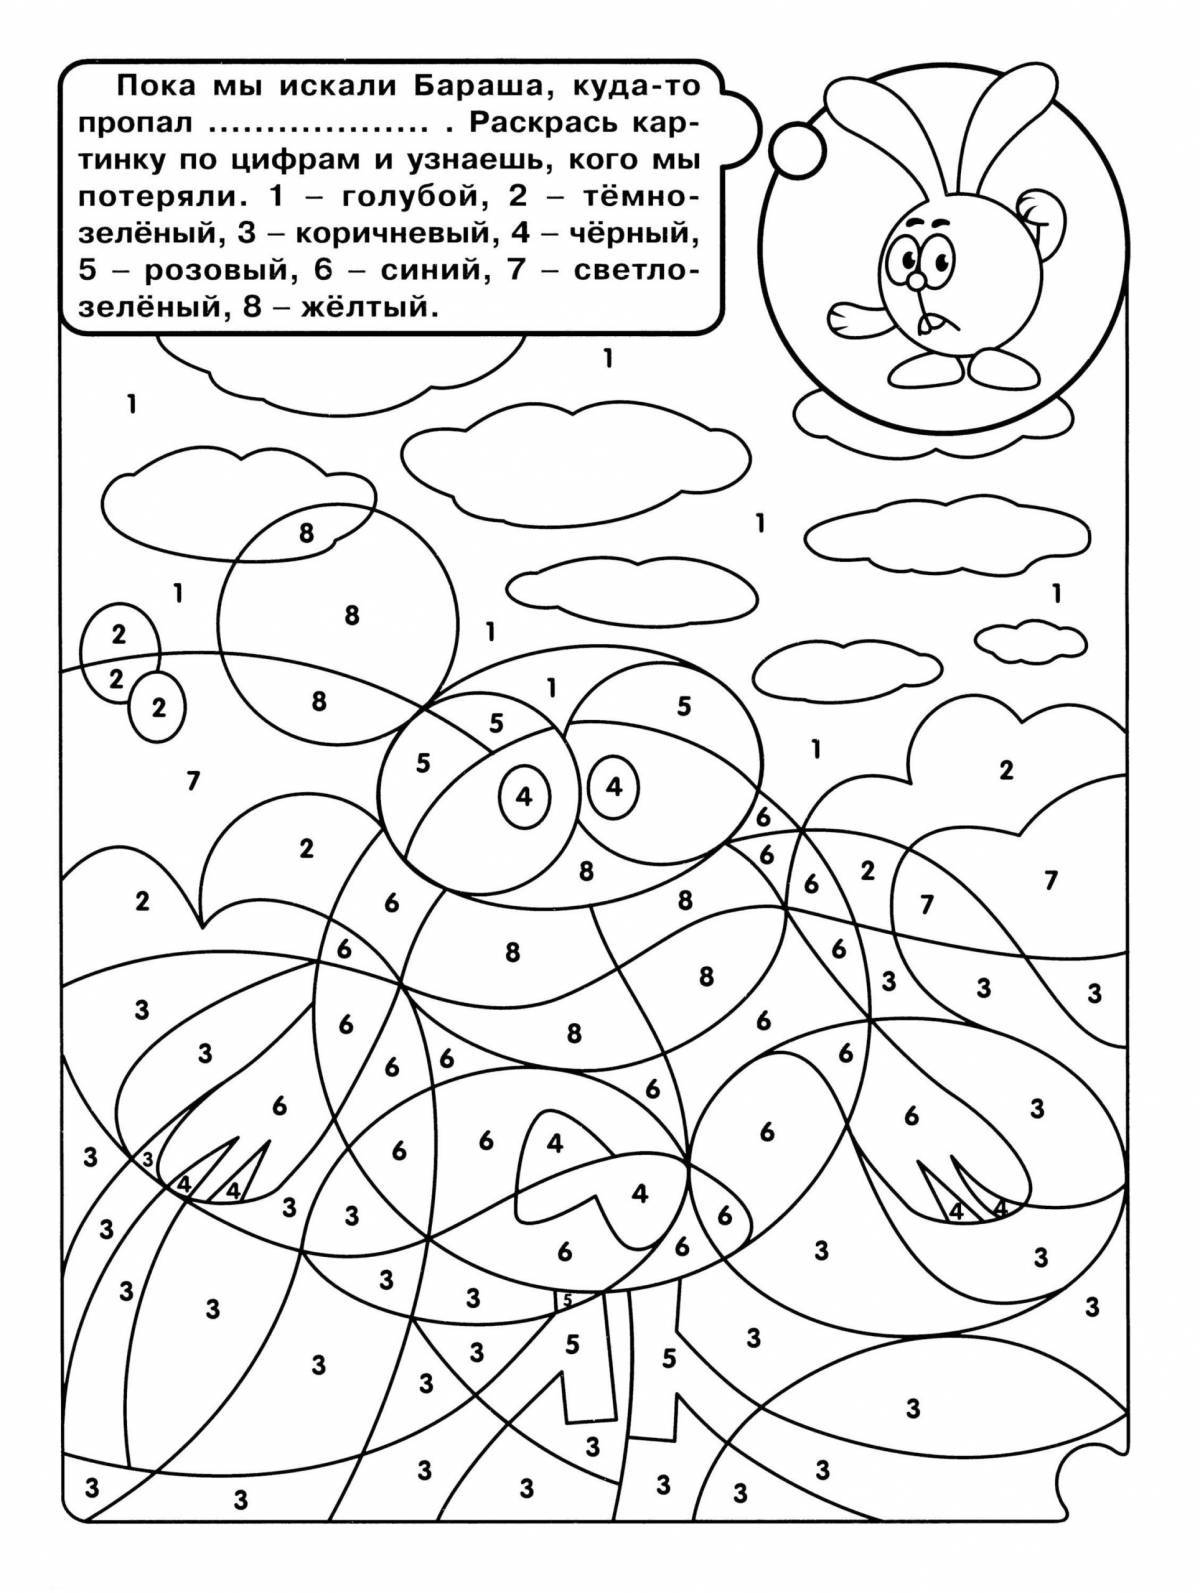 Coloring book for children aged 6 to 7